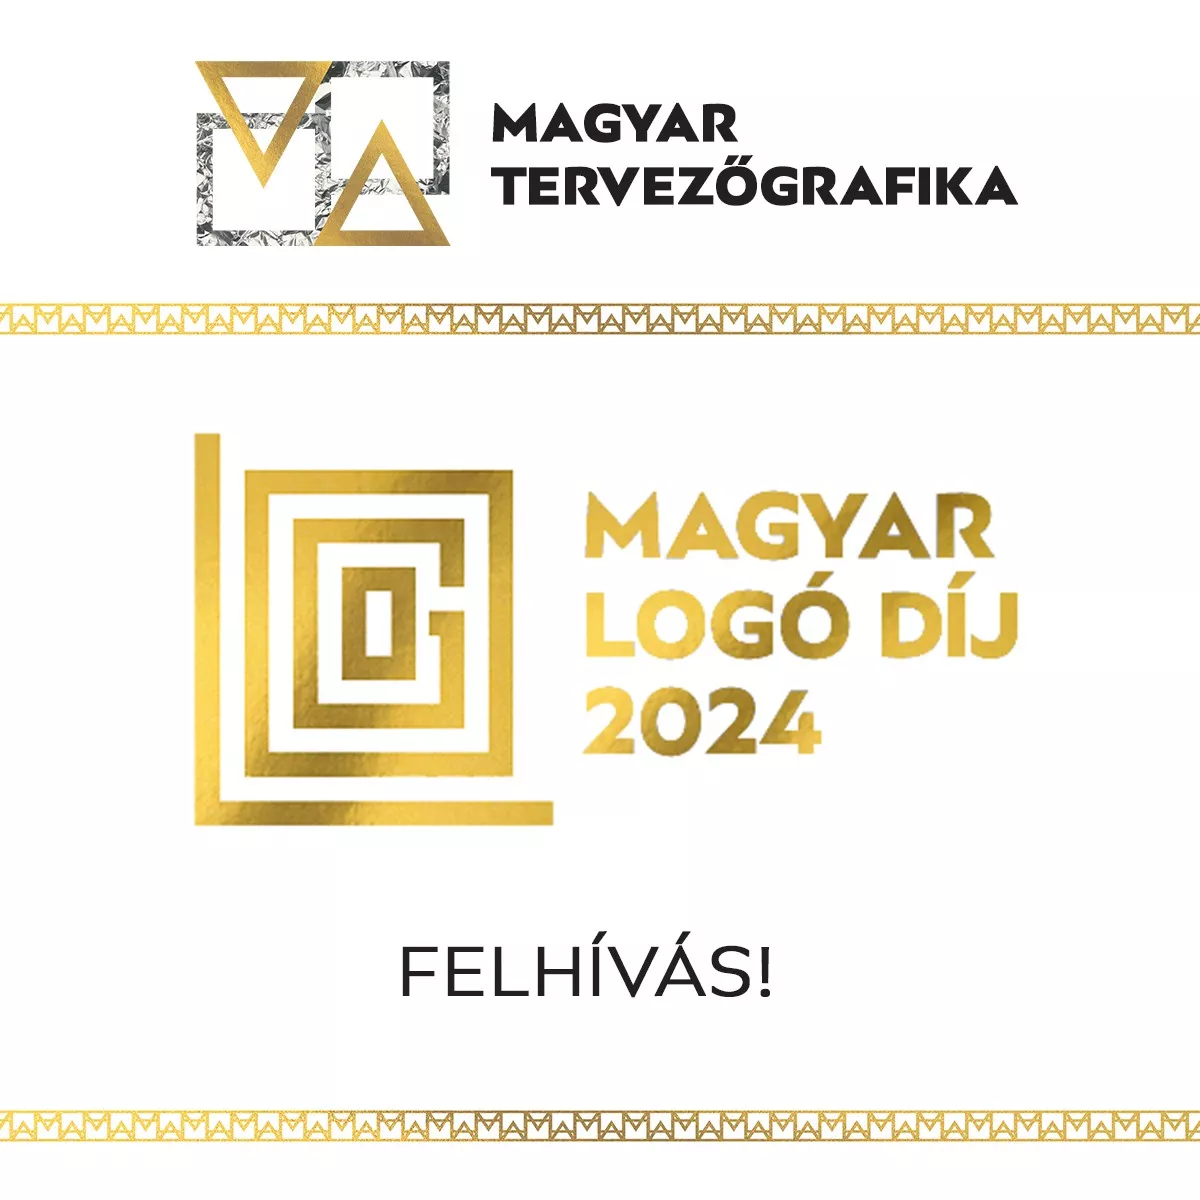 We are looking for Hungary's best logo!